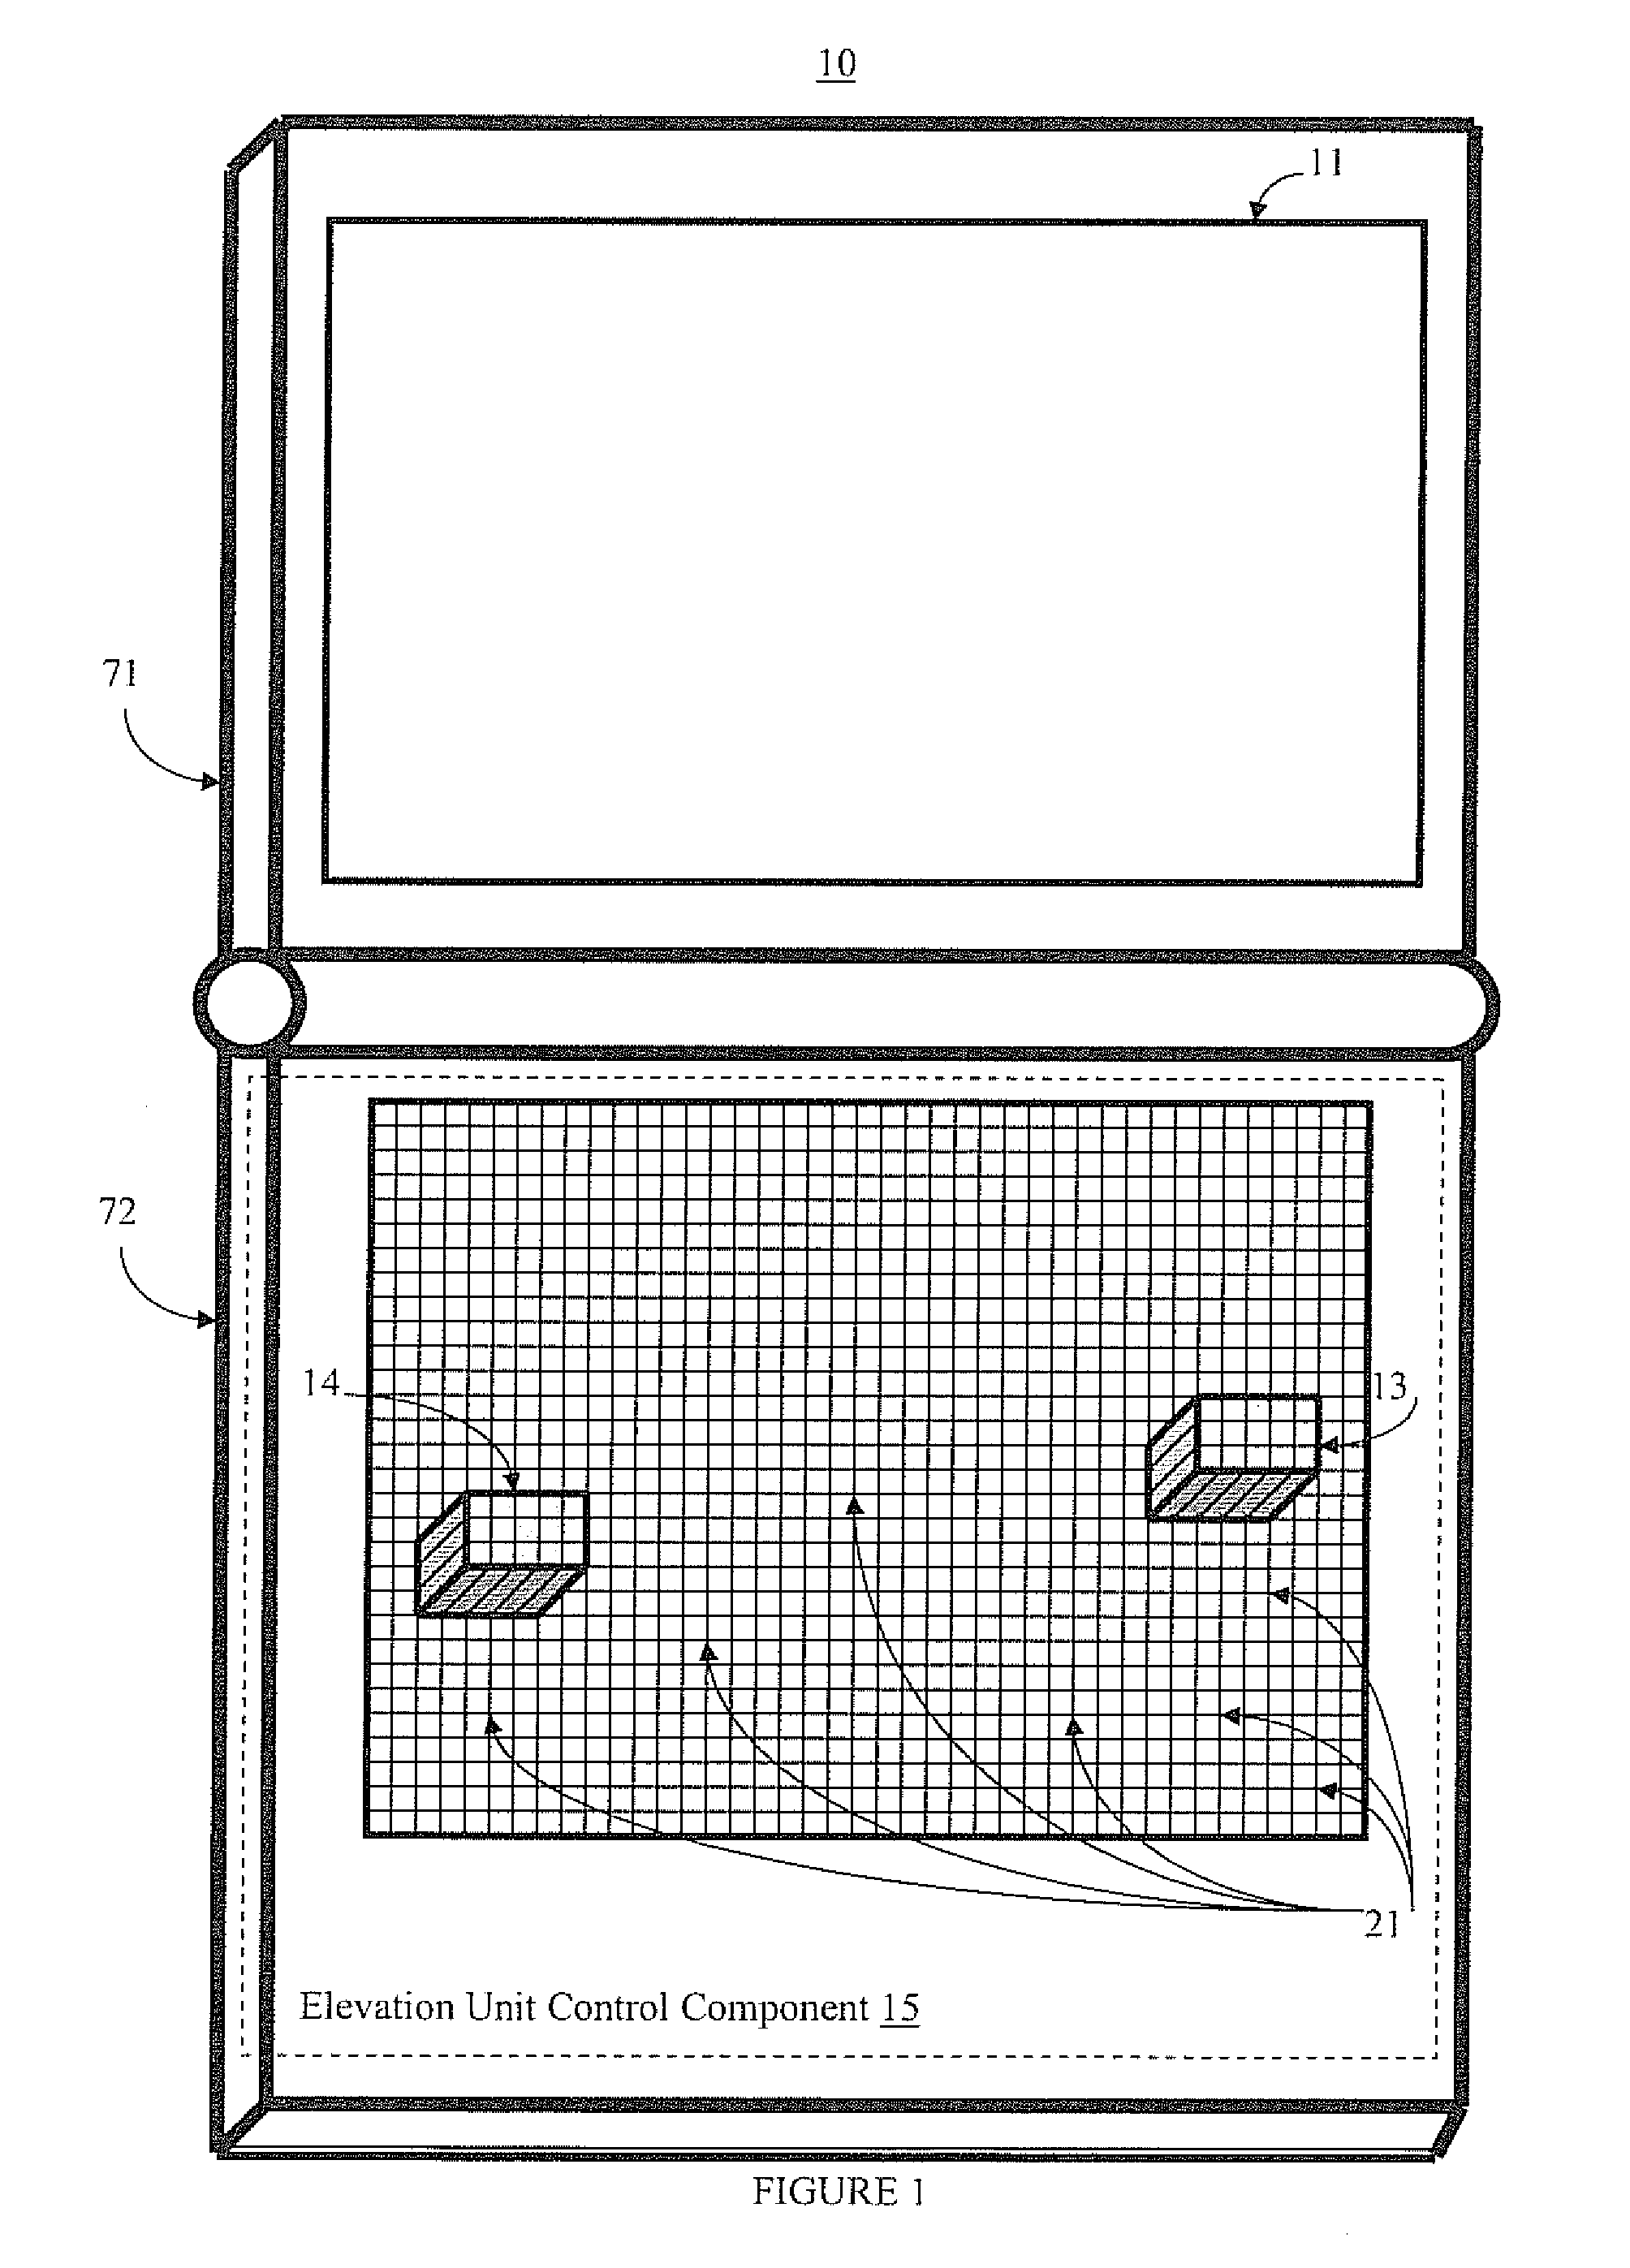 Physically reconfigurable input and output systems and methods